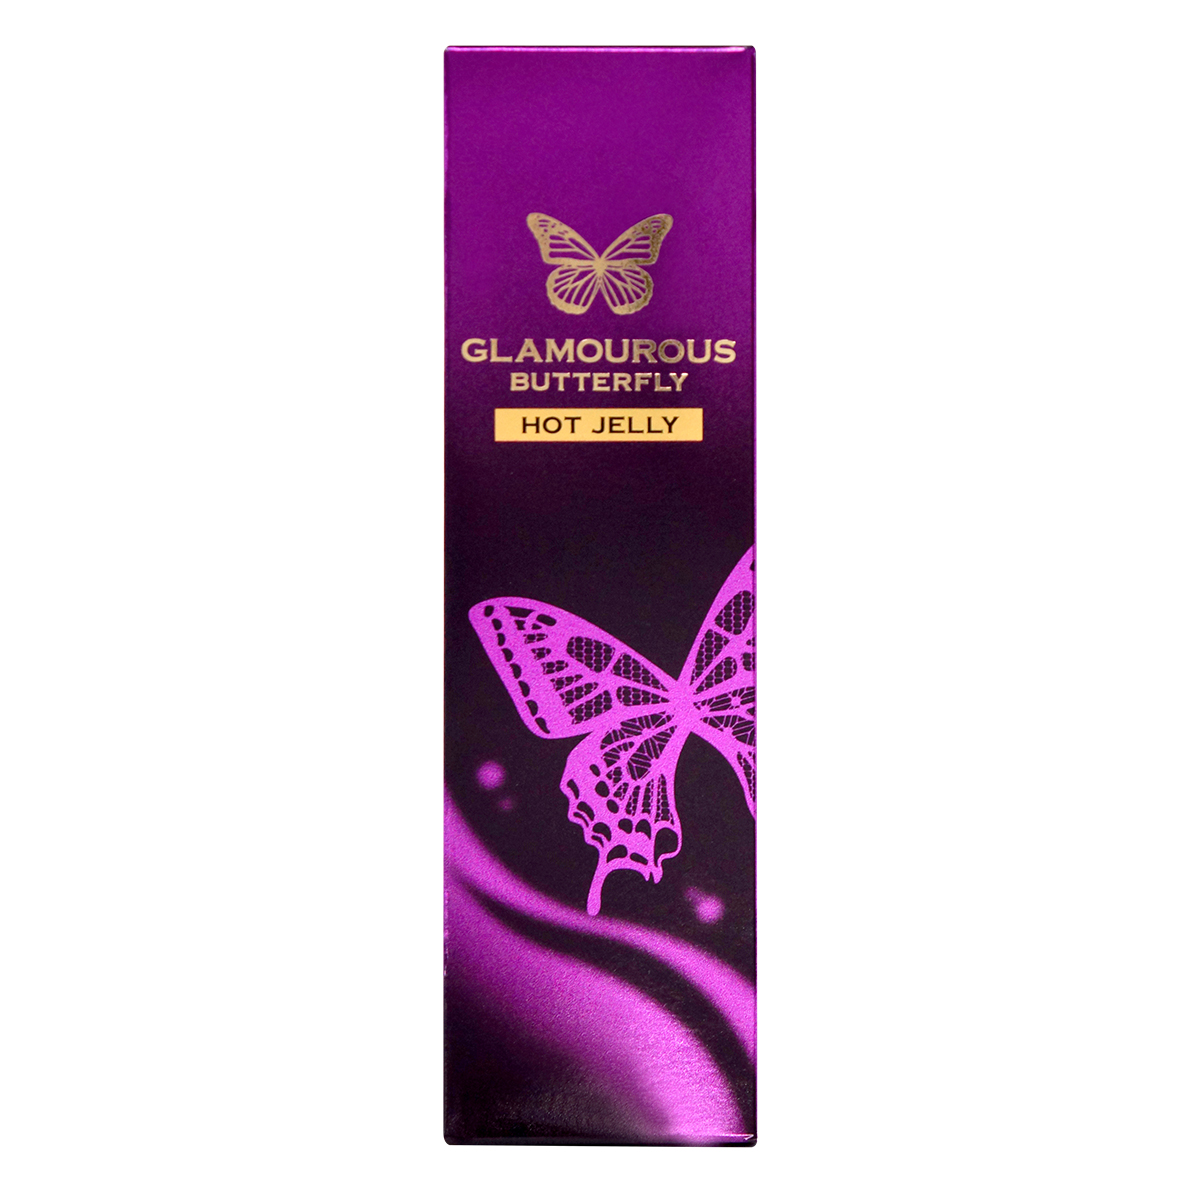 Glamourous Butterfly Hot Jelly 30ml Water-based Lubricant-p_2